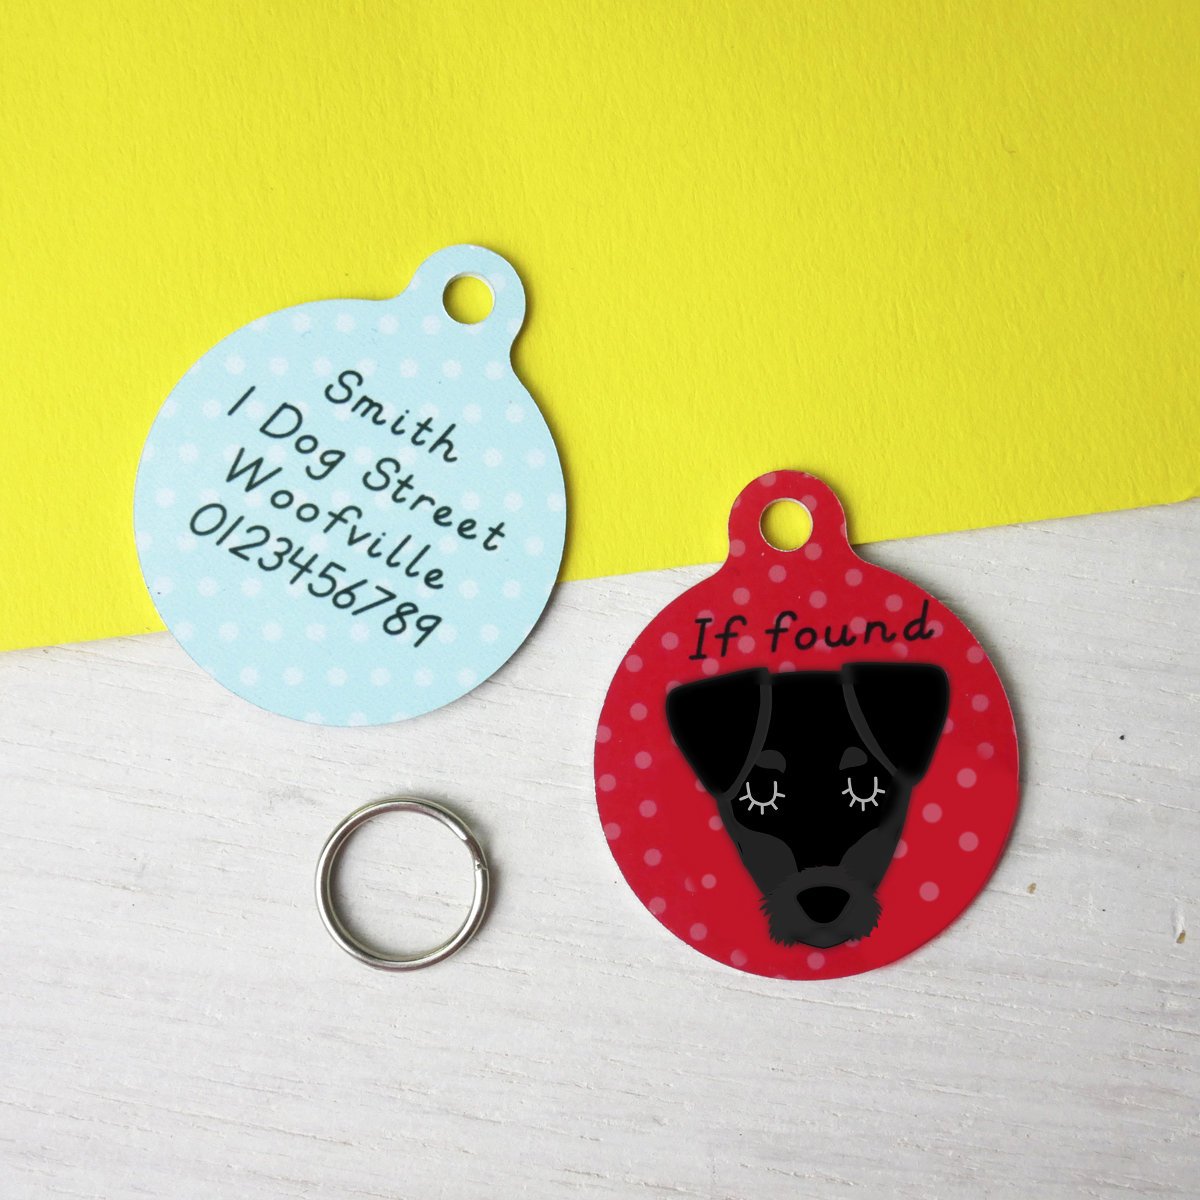 Patterdale Terrier Personalised Dog ID Tag  - Hoobynoo - Personalised Pet Tags and Gifts